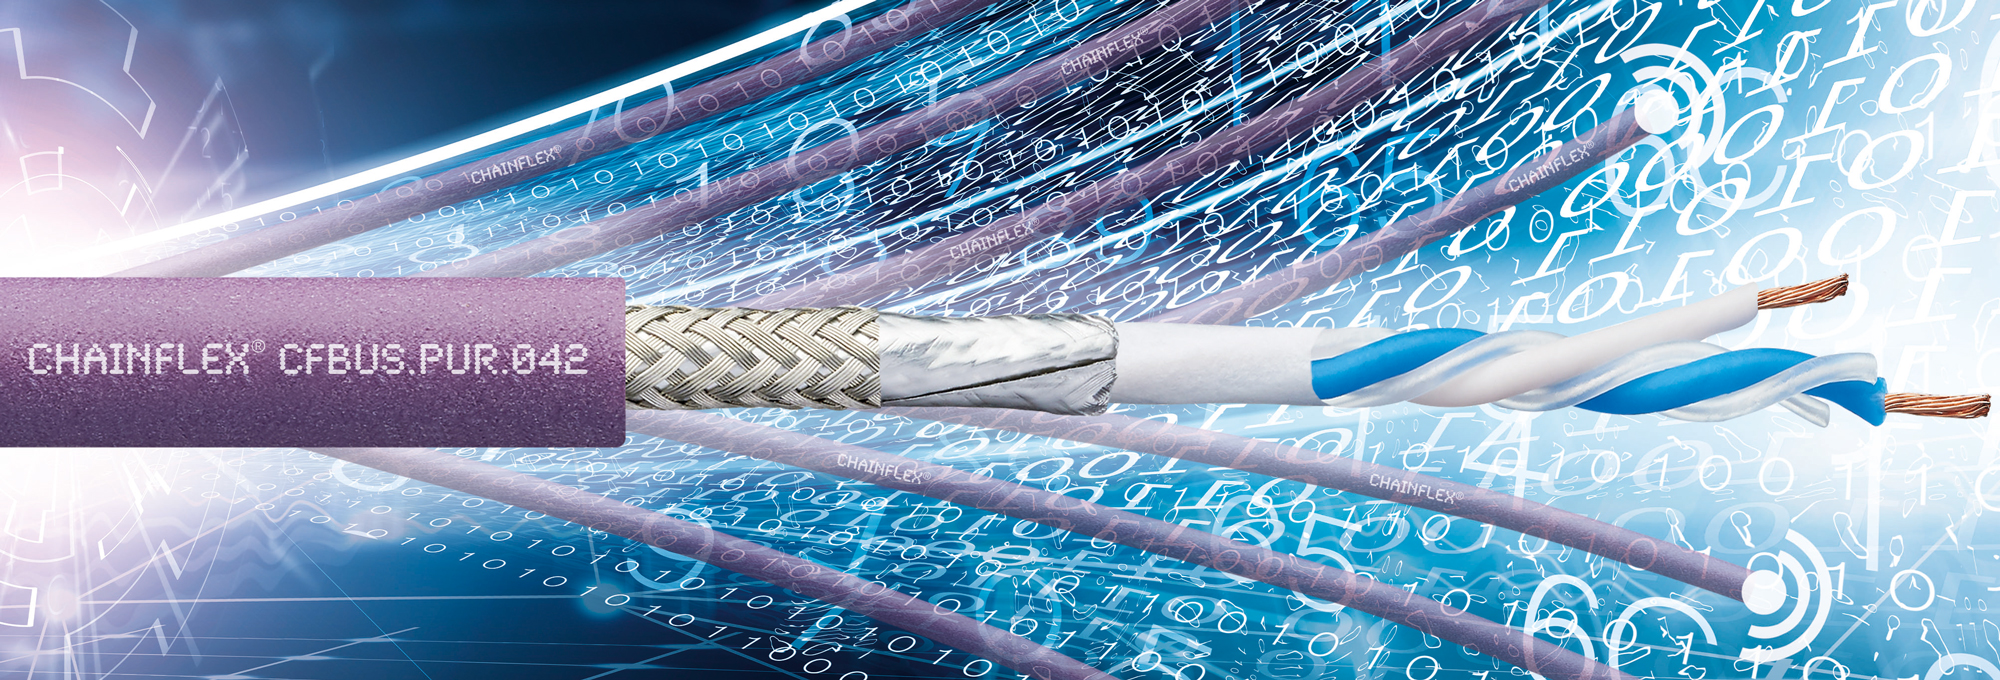 A single pair ethernet cable from igus